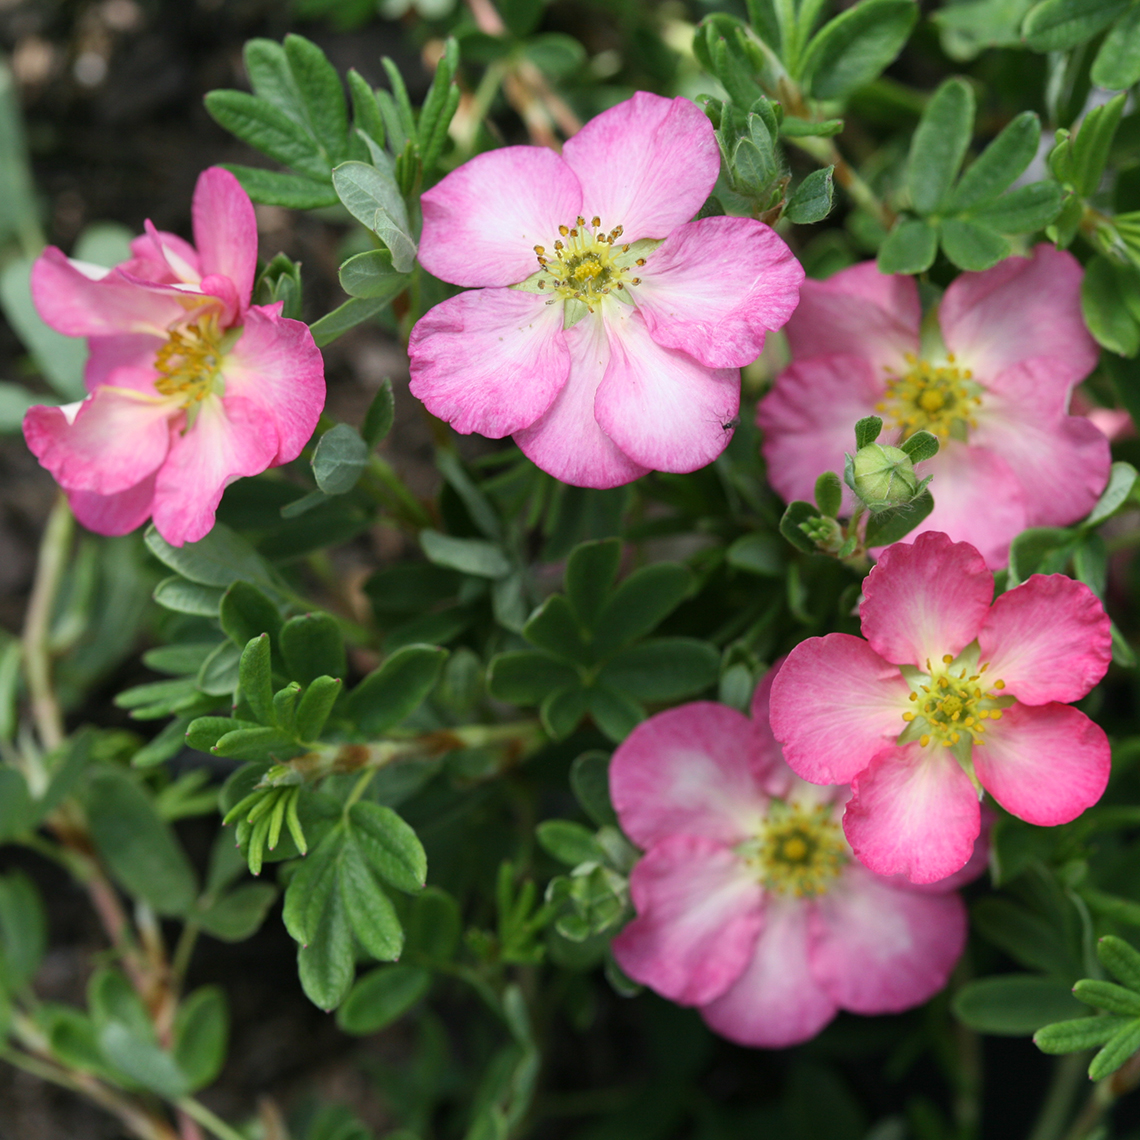 Group of five pink and white Happy Face Hearts Potentilla flowers